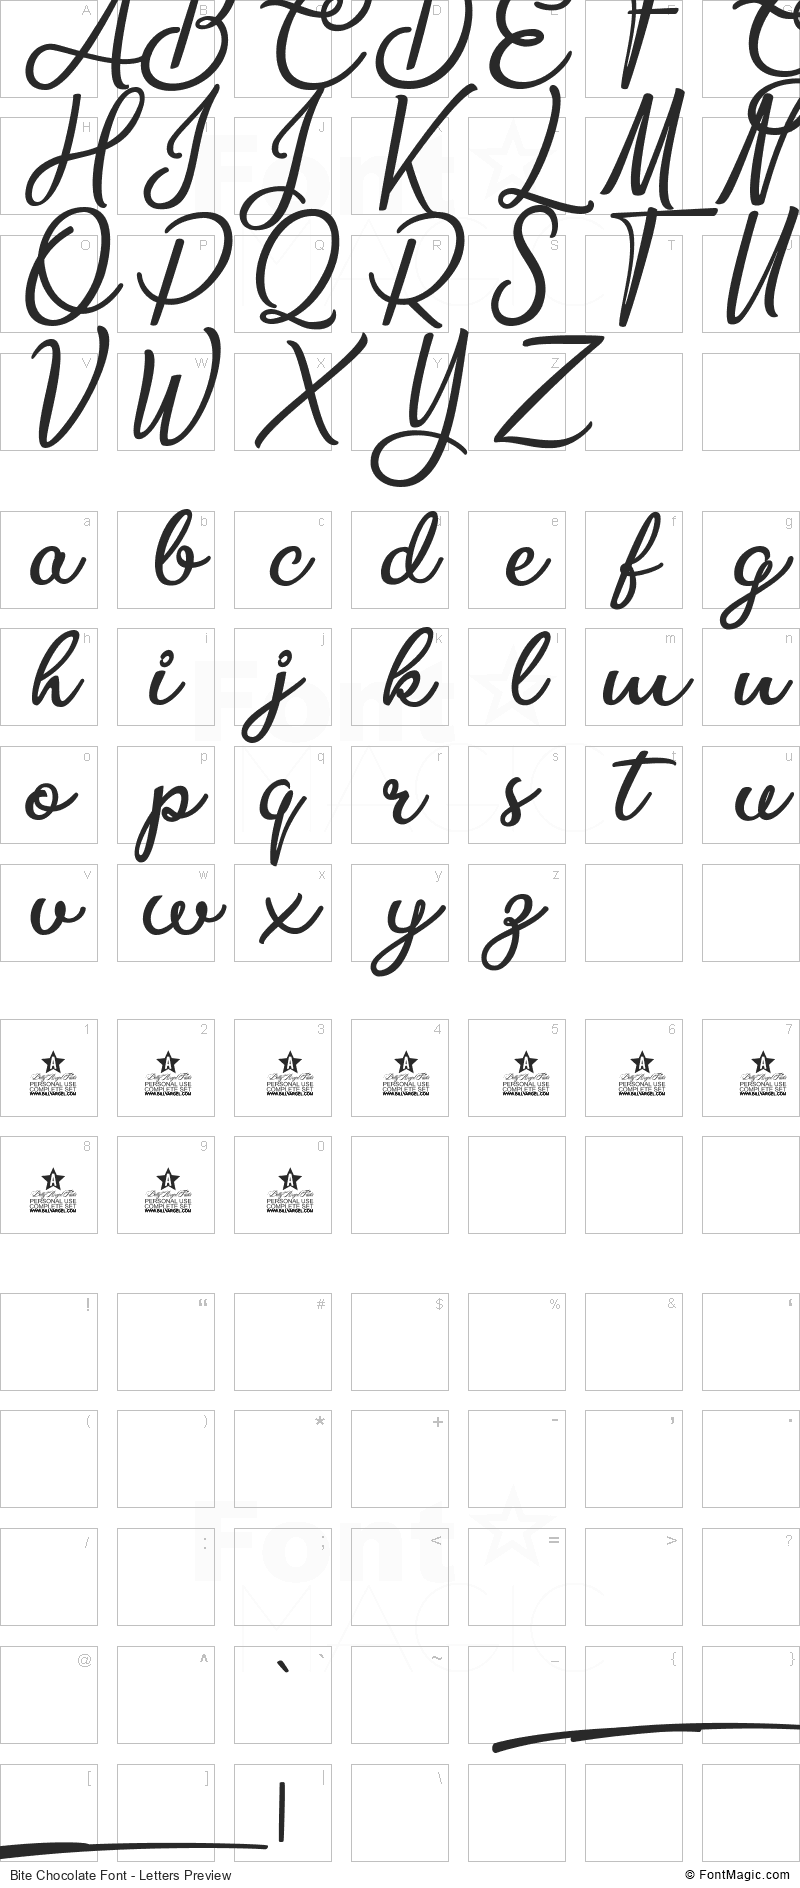 Bite Chocolate Font - All Latters Preview Chart